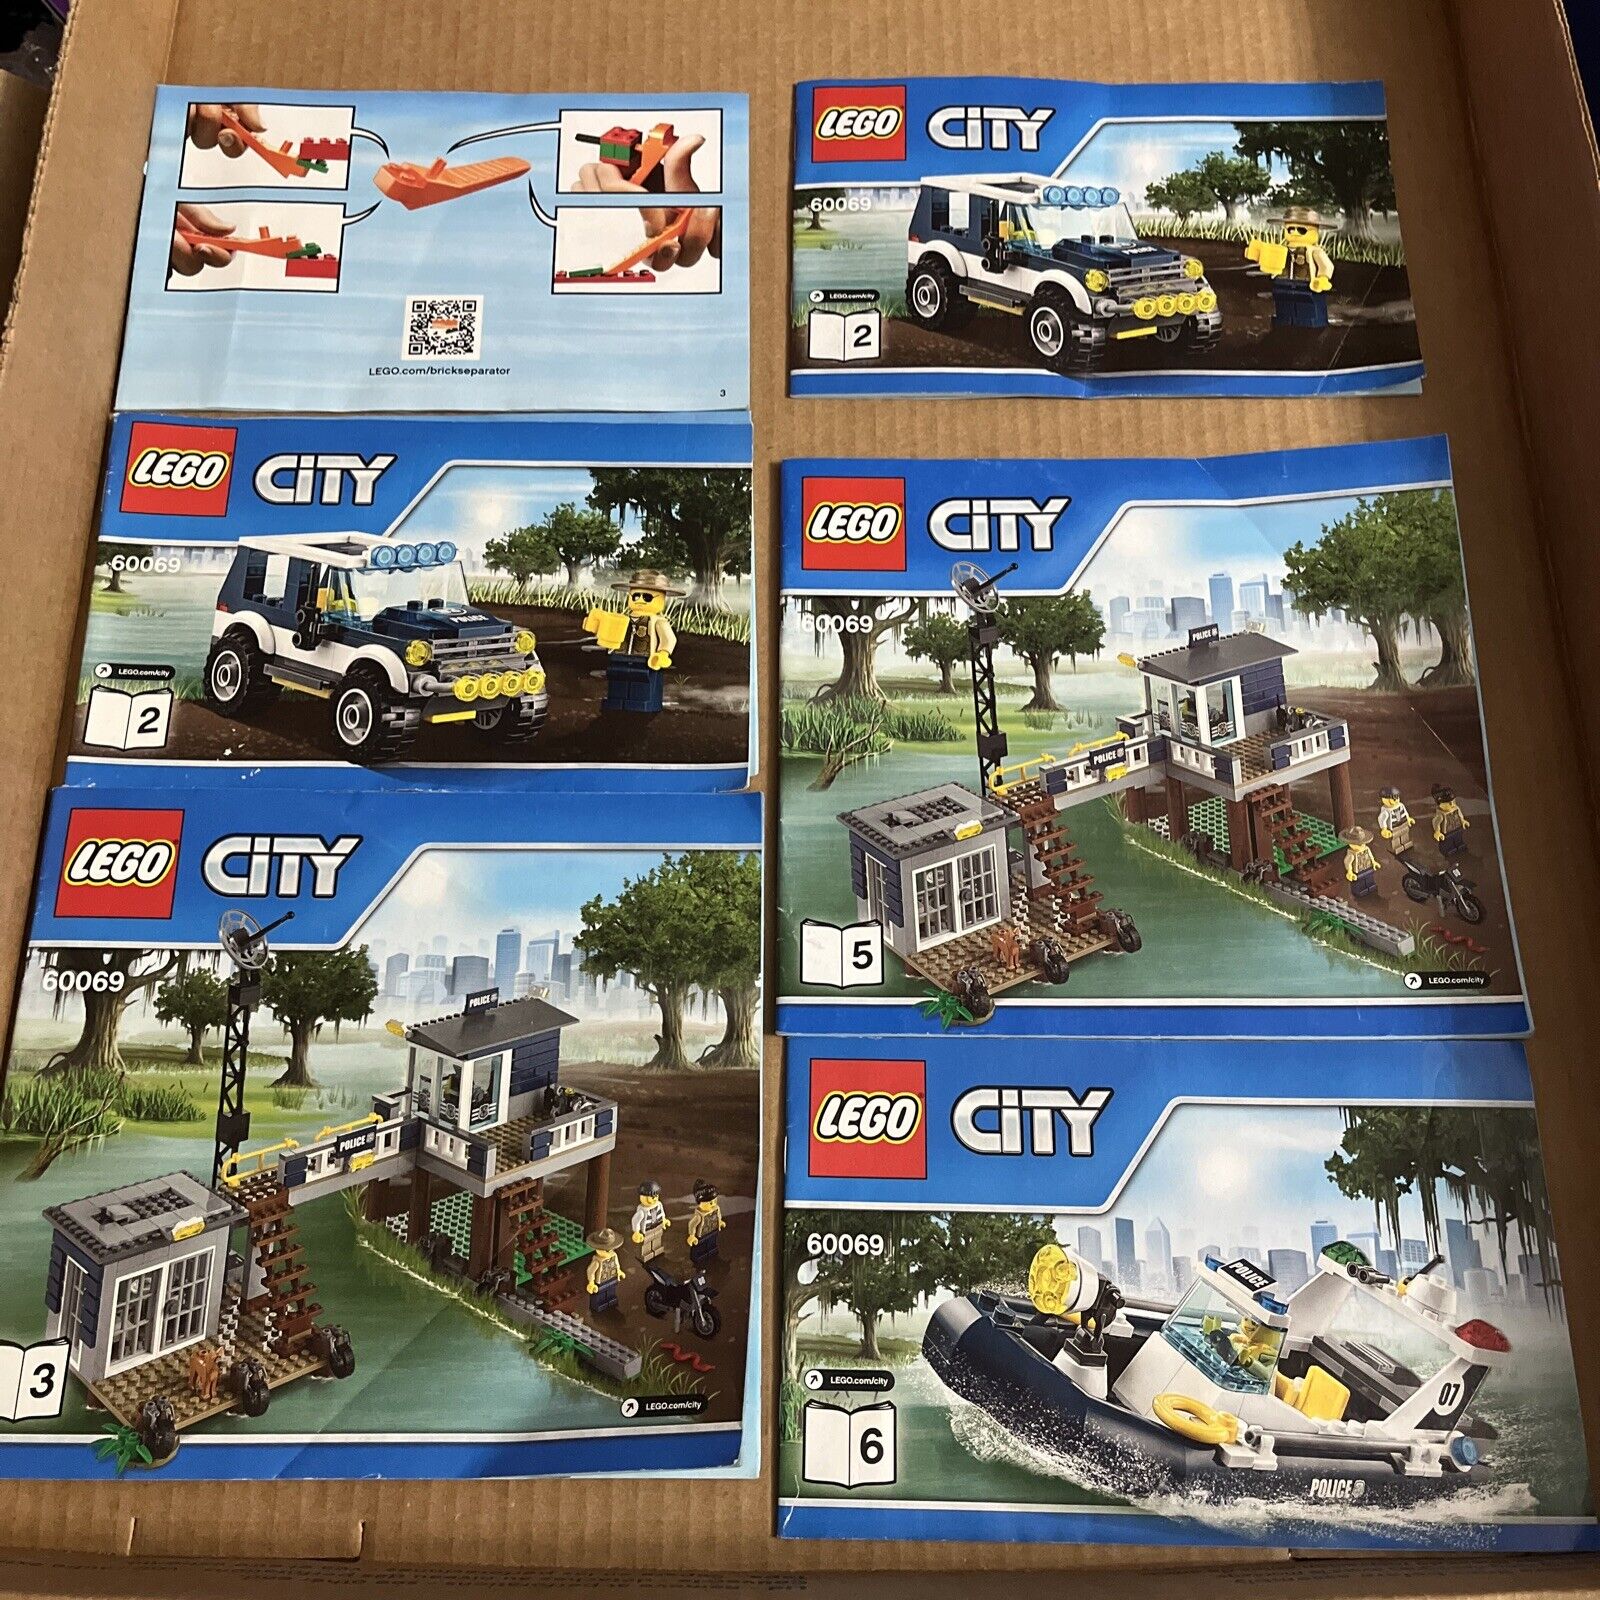 LEGO City Swamp Police Station 60069 Manuals Only. Missing Book 4. No Bricks